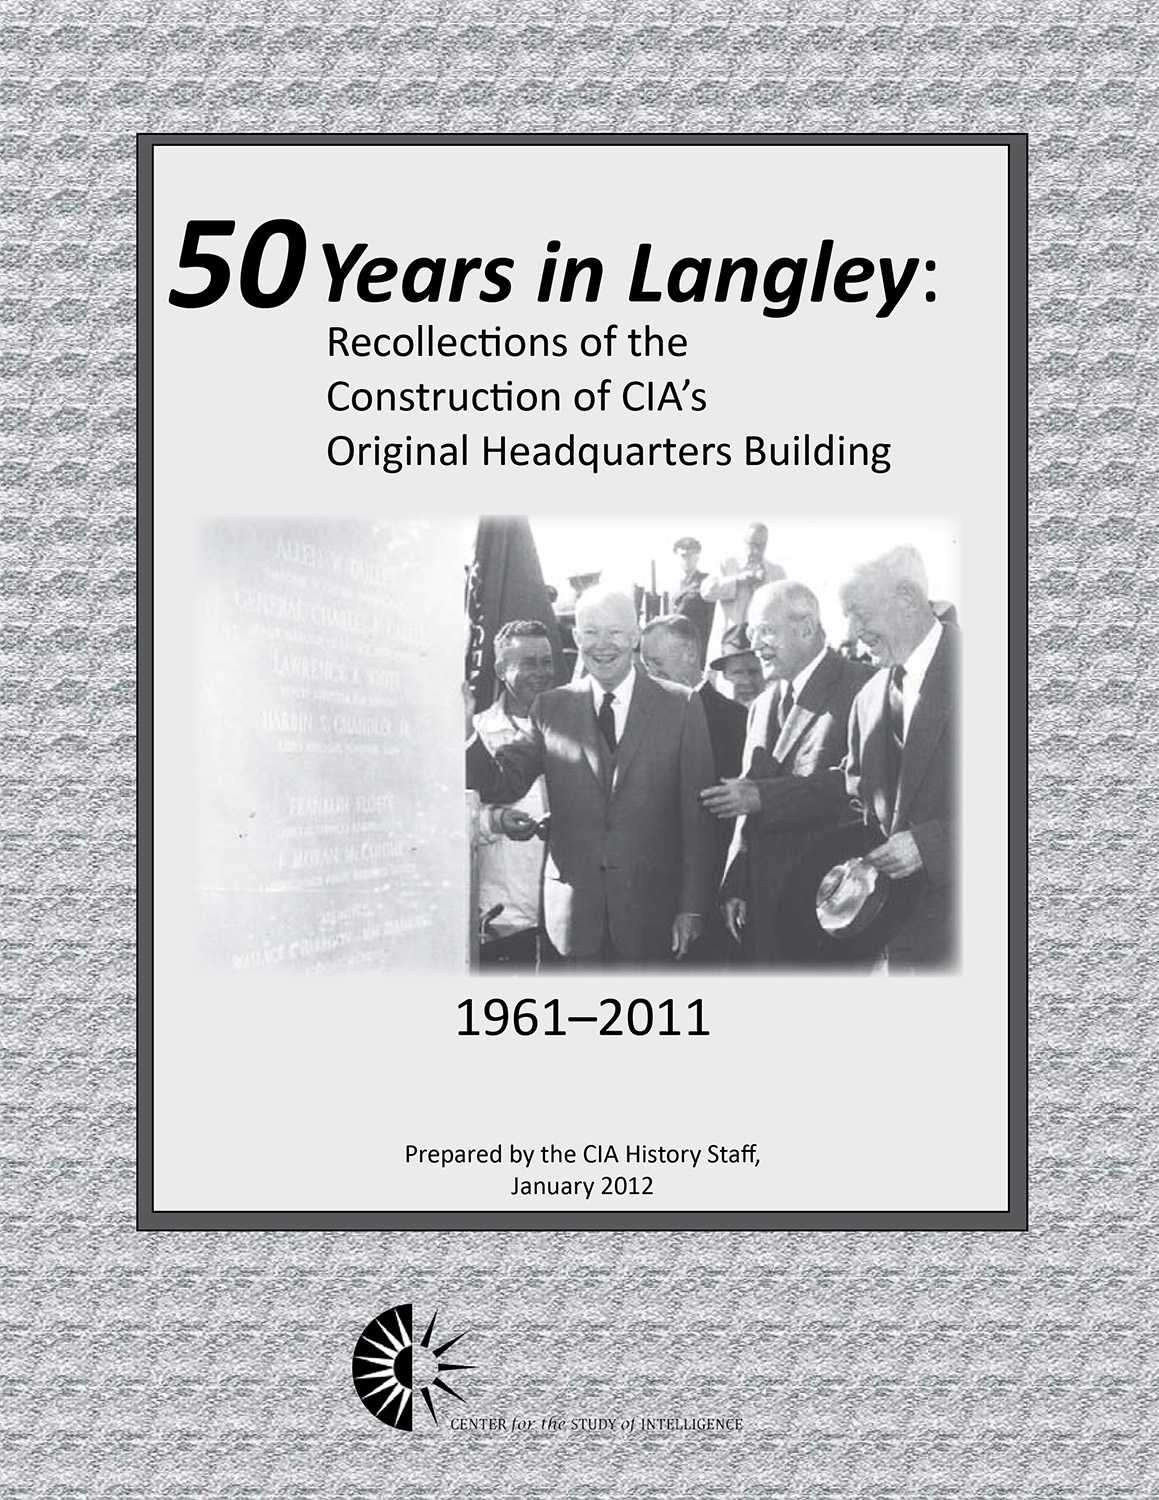 An image of the cover of the article 50 Years in Langley: Recollections of the Construction of CIA's Original Headquarters Building.